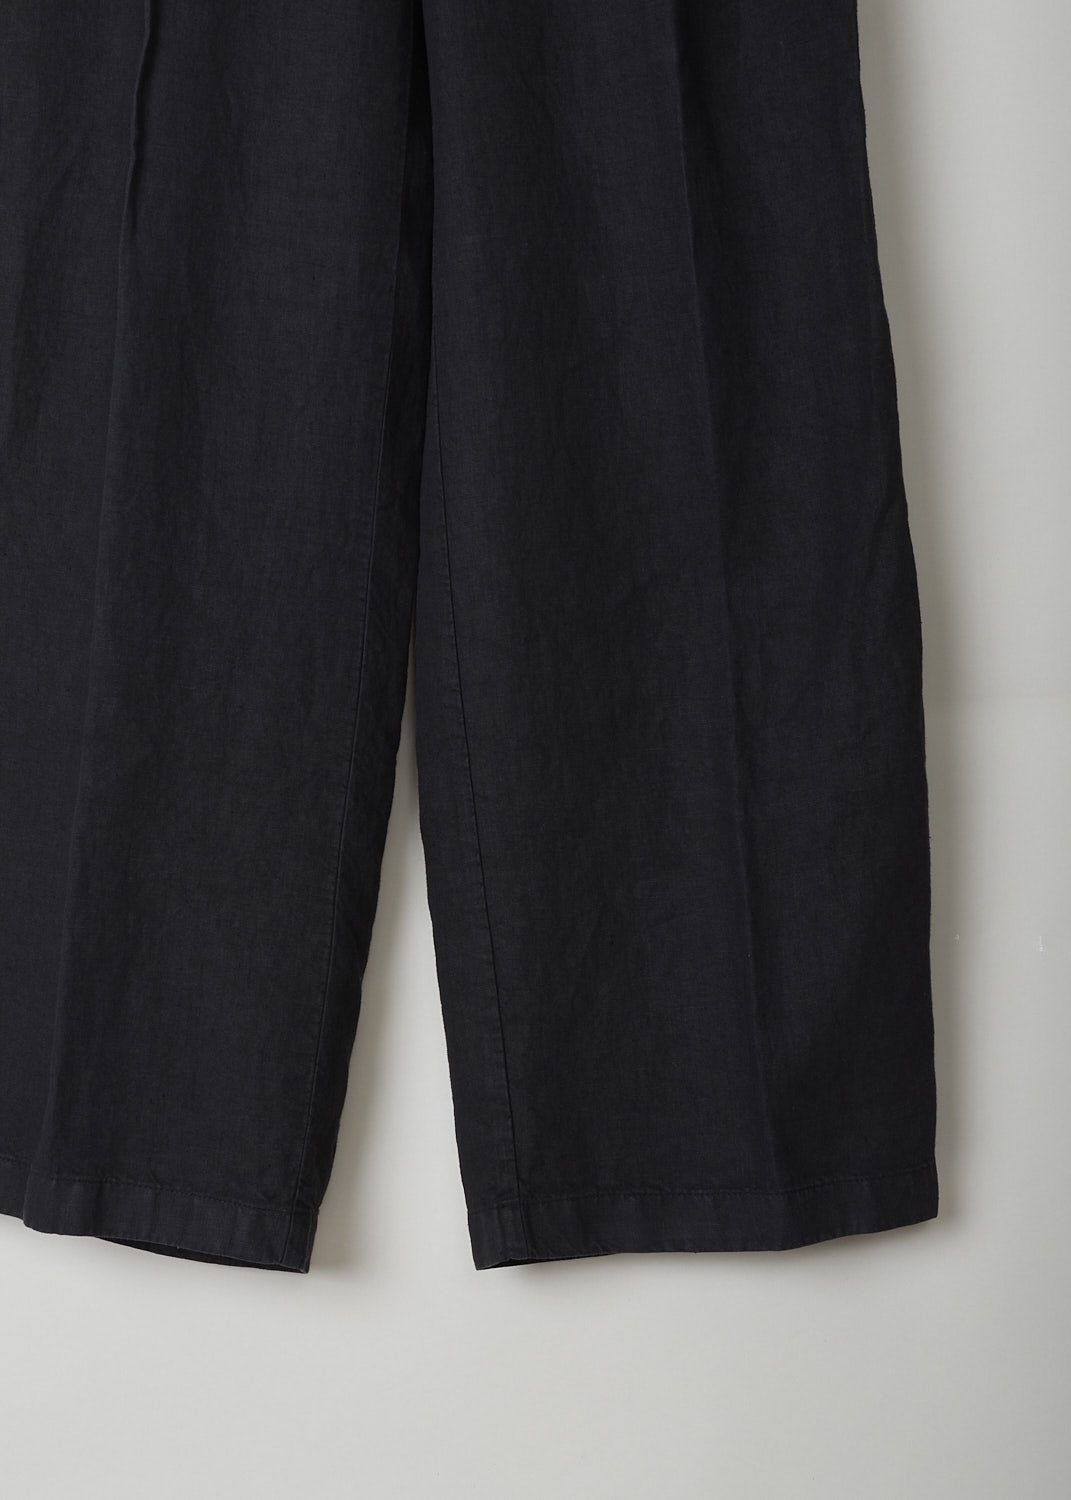 ASPESI, BLACK LINEN PANTS WITH STRAIGHT WIDE LEGS, H108_C253_85241, Black, Detail, These black linen pants have a narrow waistband with belt loops. The closure option is a concealed hook and zipper. The straight wide pant legs have centre pleats The pants have forward slanted pockets in the front and buttoned welt pockets in the back.

